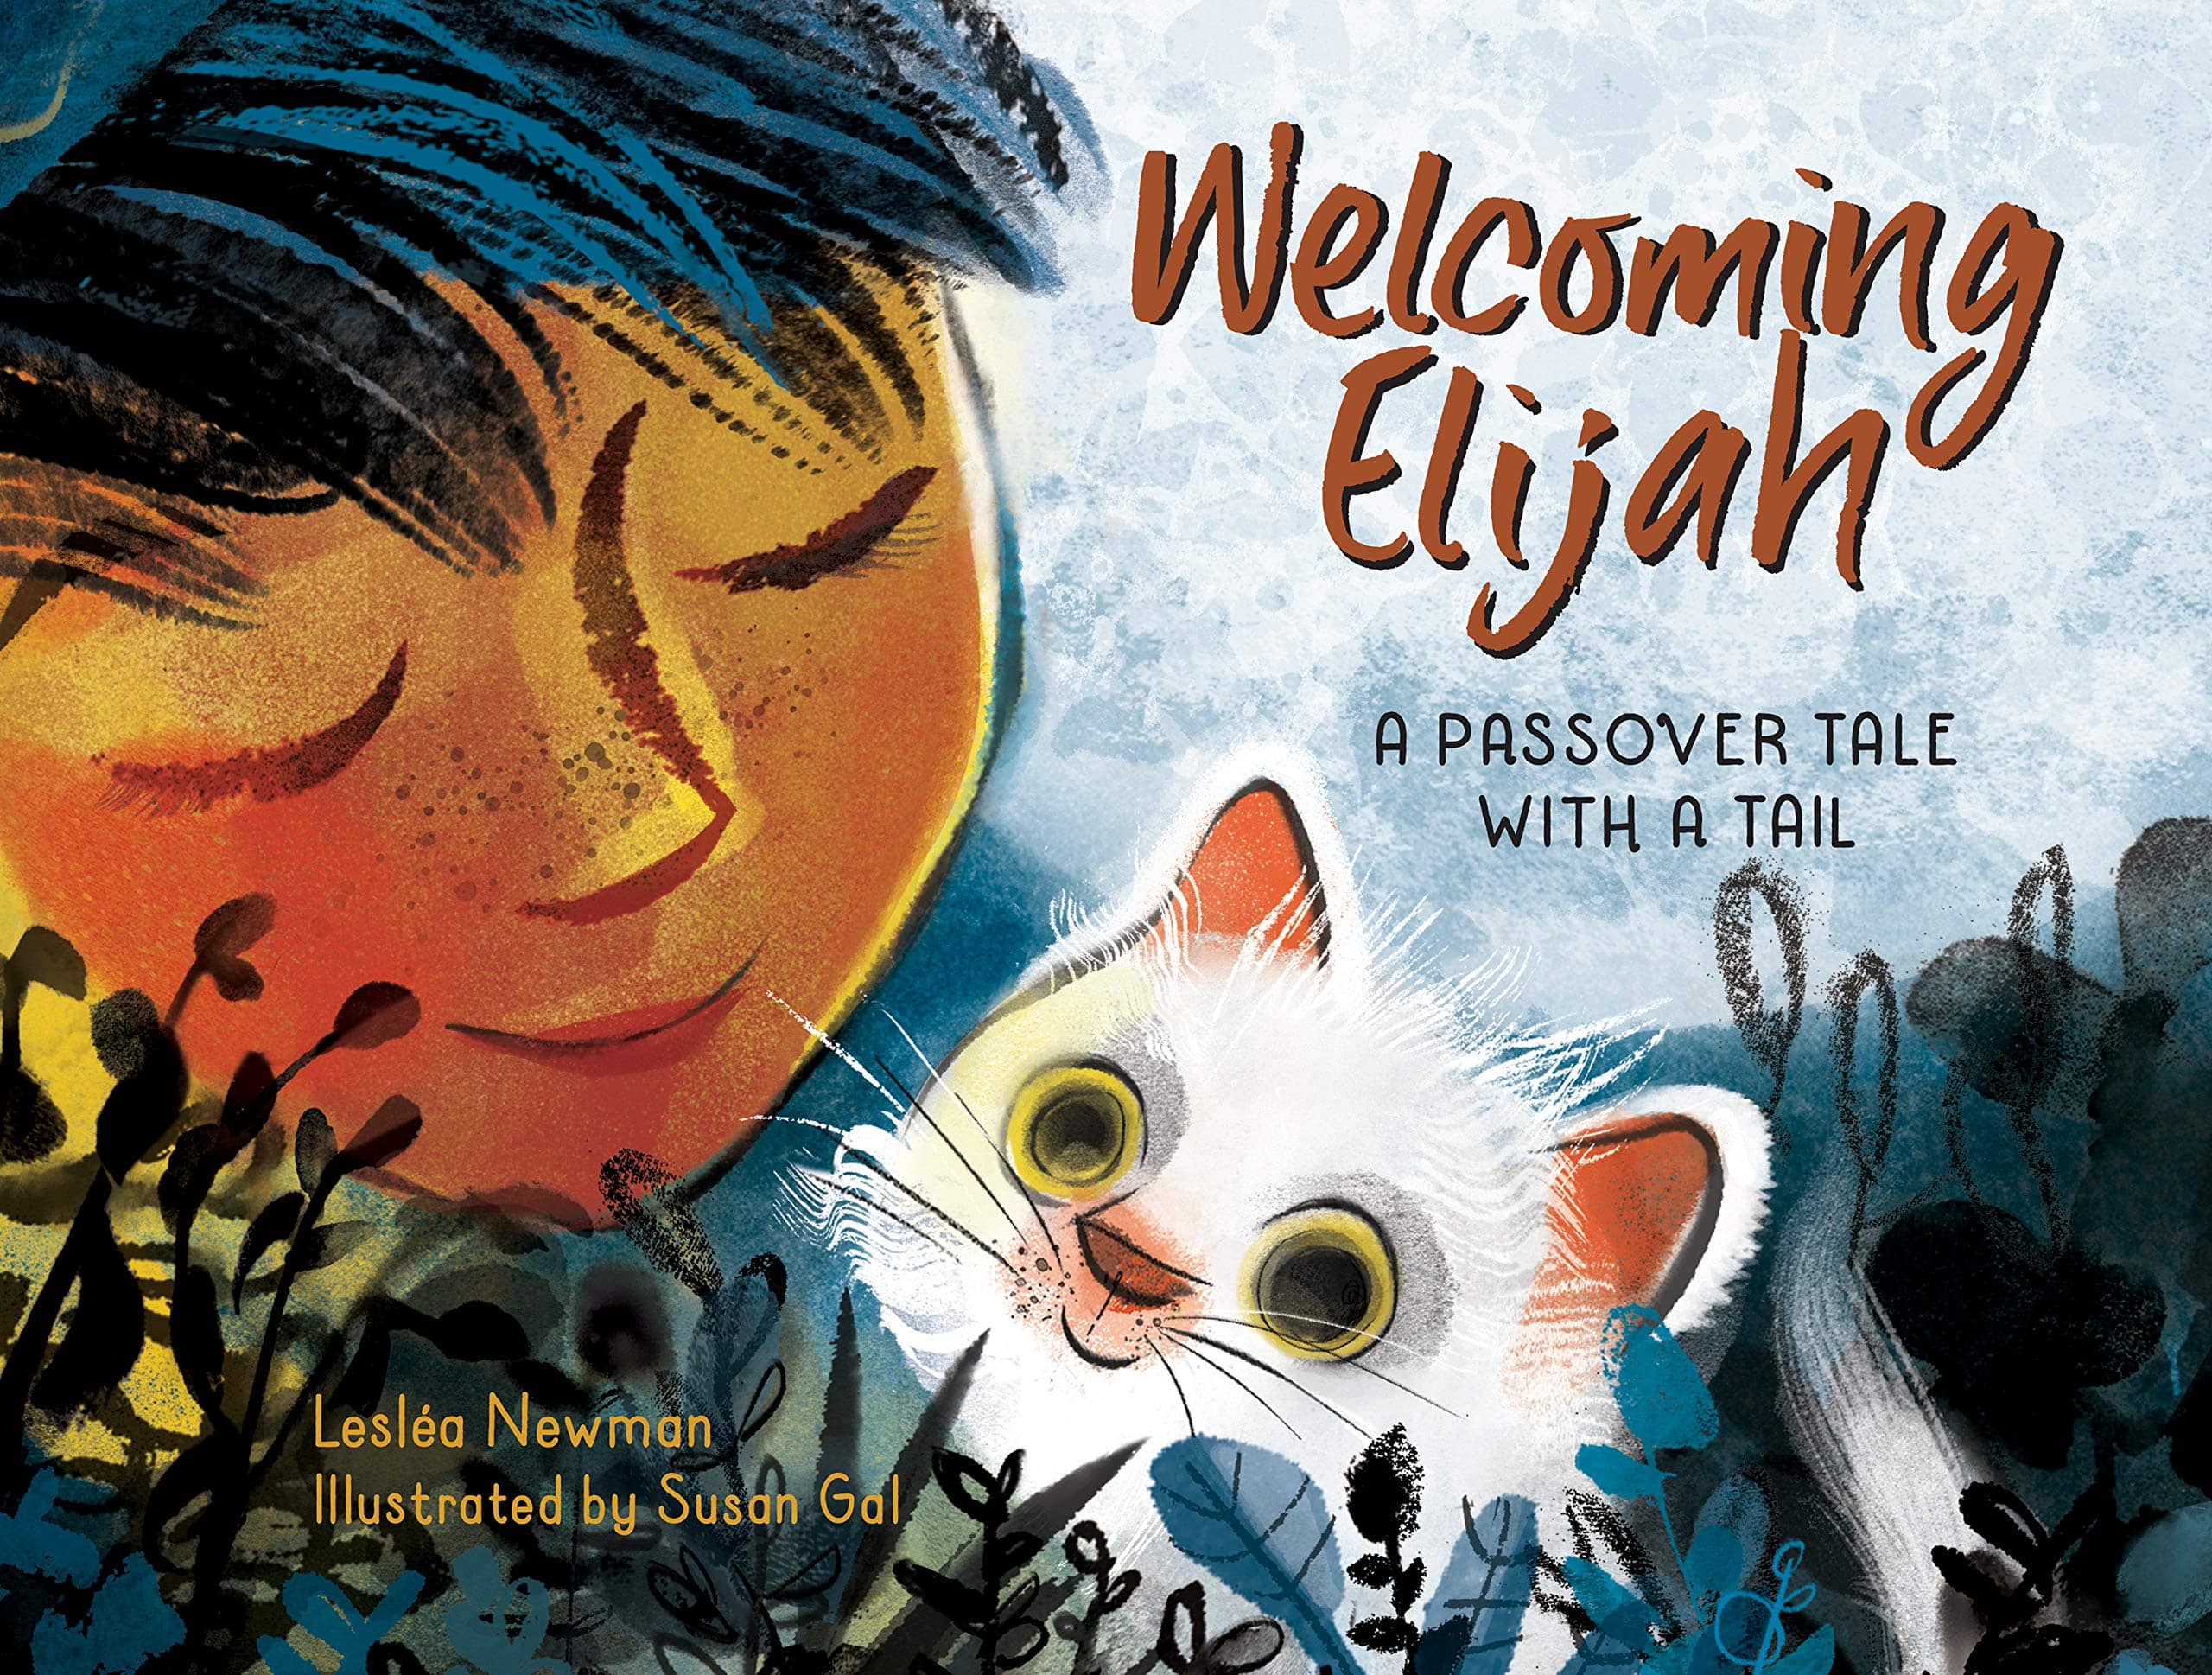 Welcoming Elijah: A Passover Tale with a Tail book cover